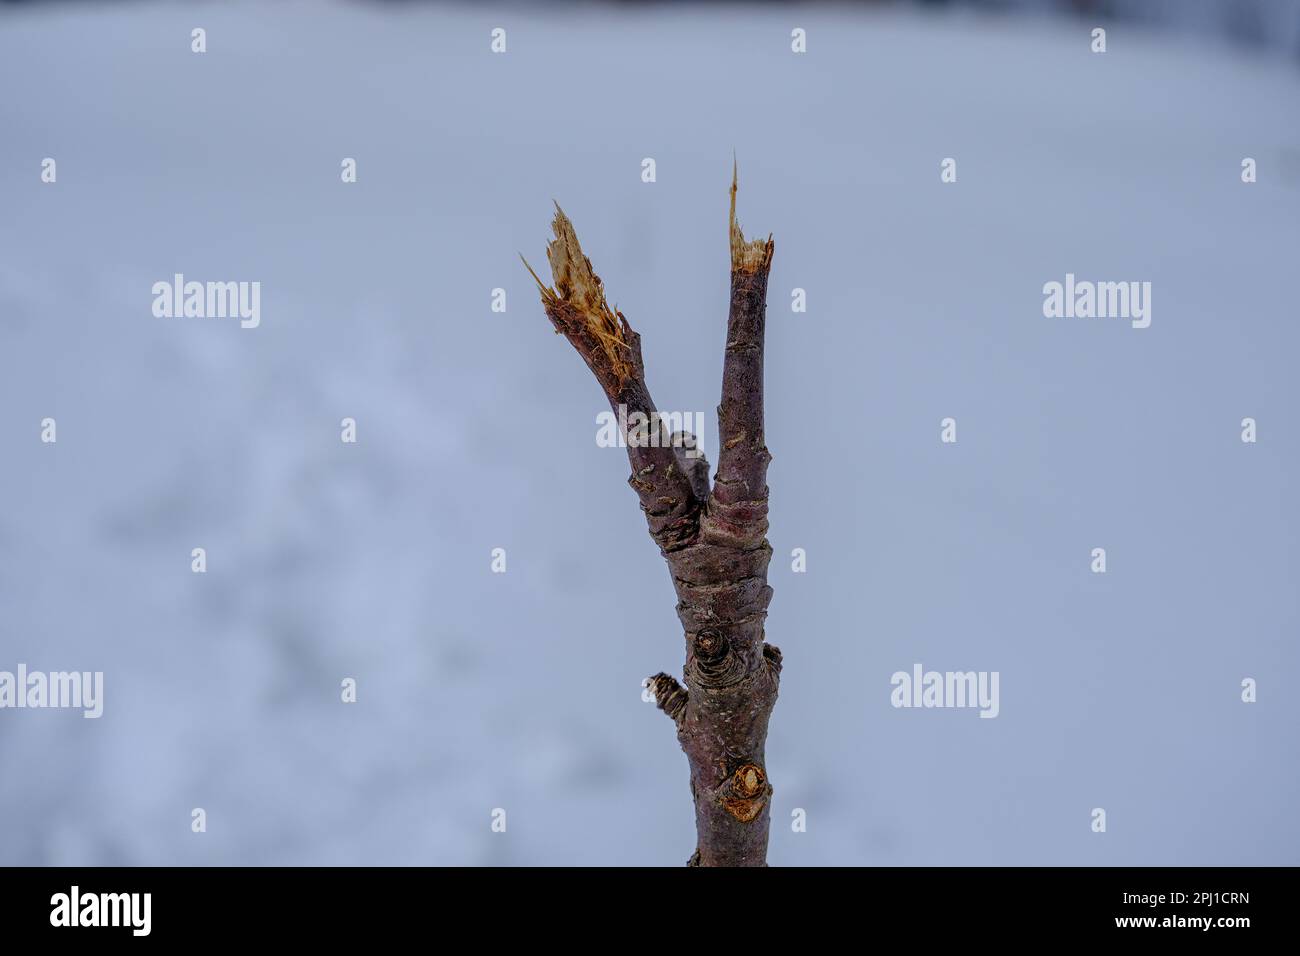 A young apple tree has been gnawed by forest animals. Stock Photo